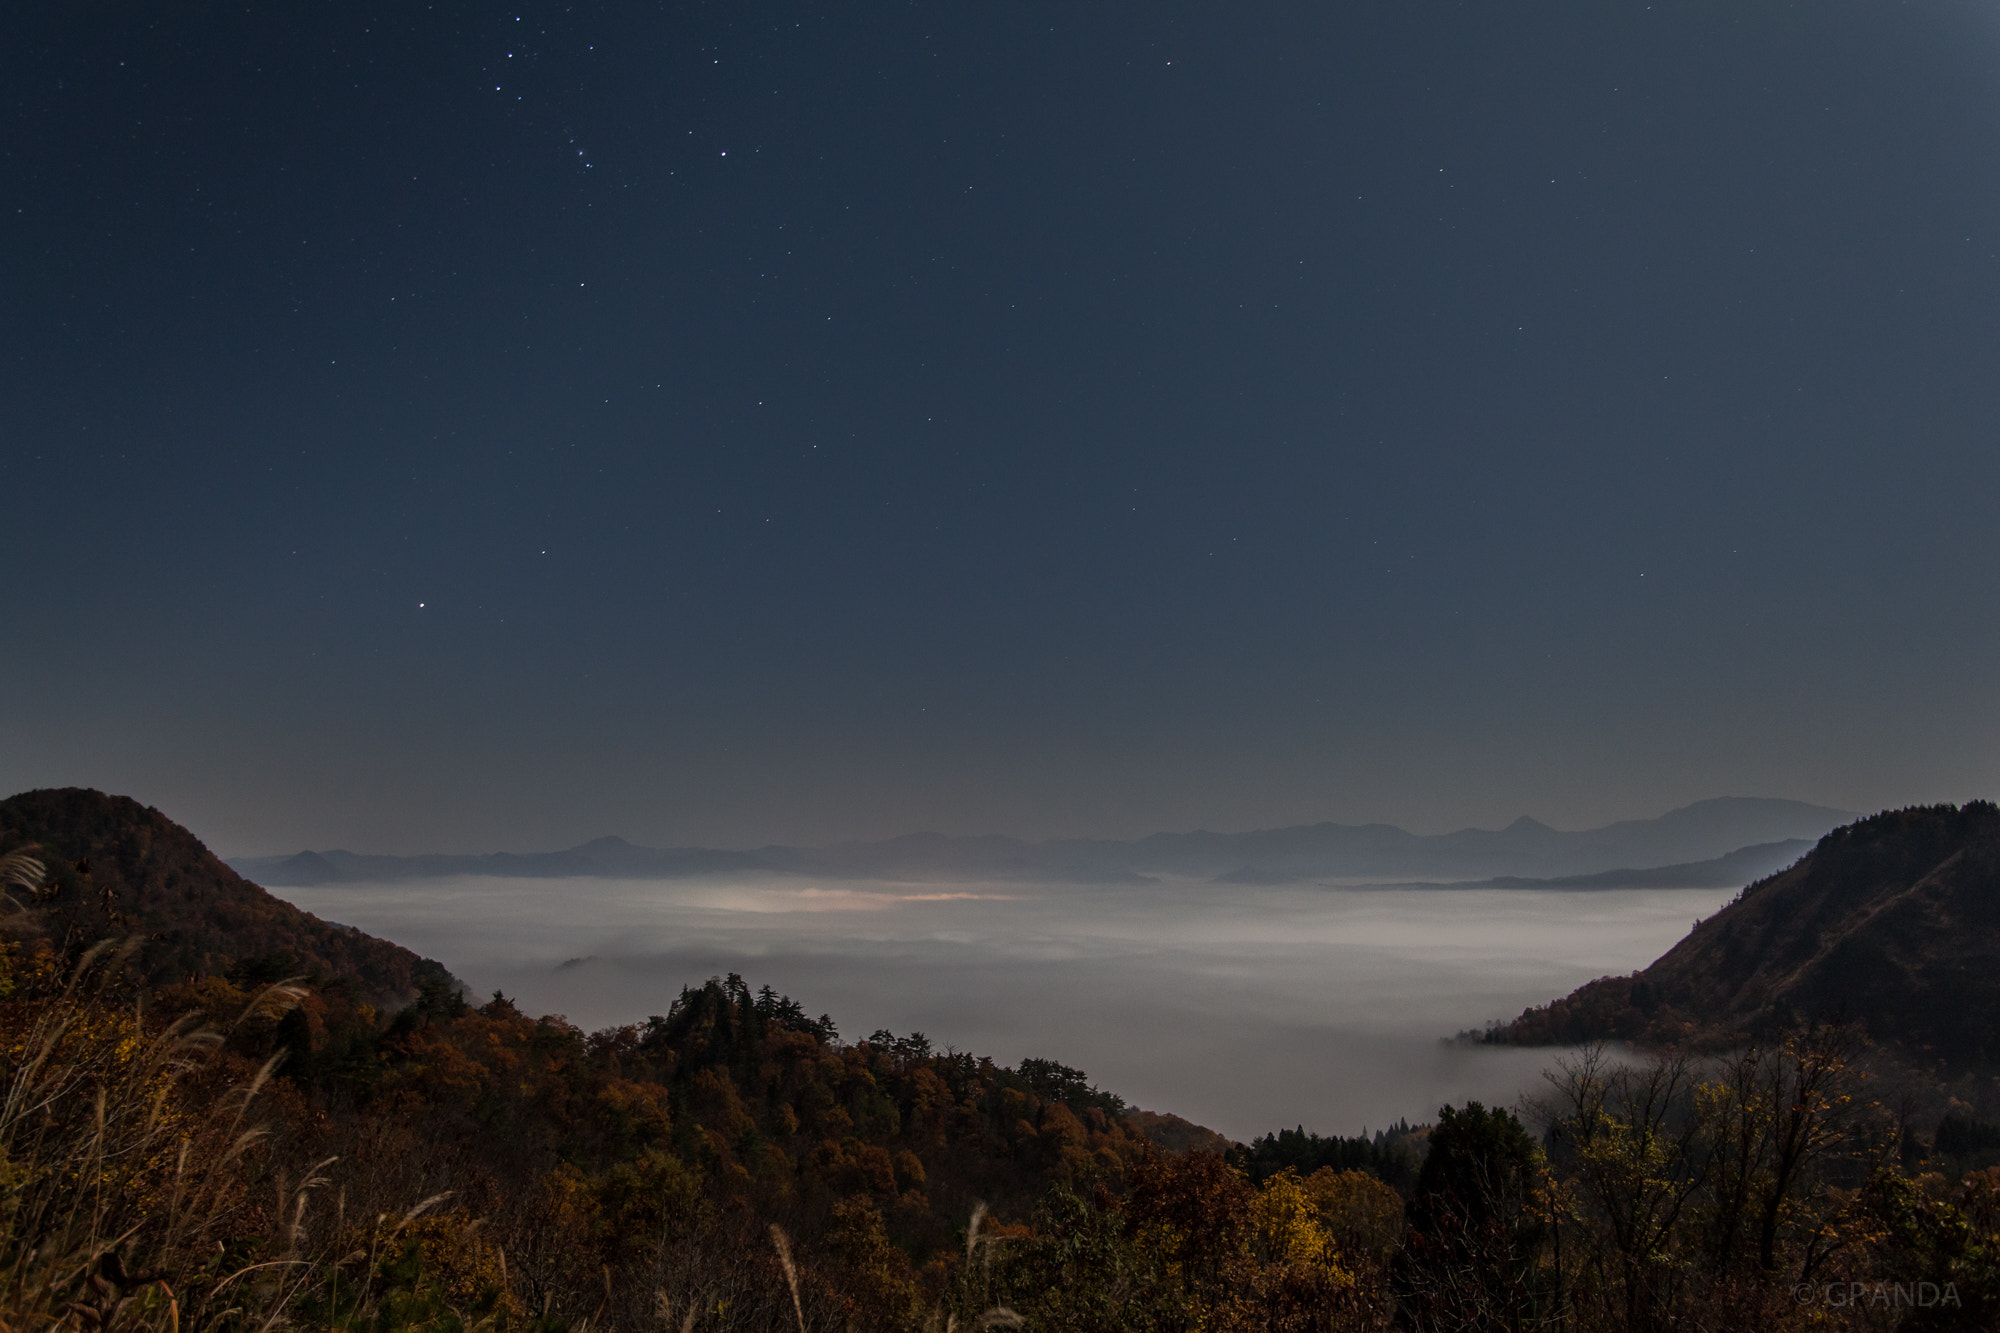 Tamron SP AF 17-35mm F2.8-4 Di LD Aspherical (IF) sample photo. Sea of clouds on a moonlit night photography